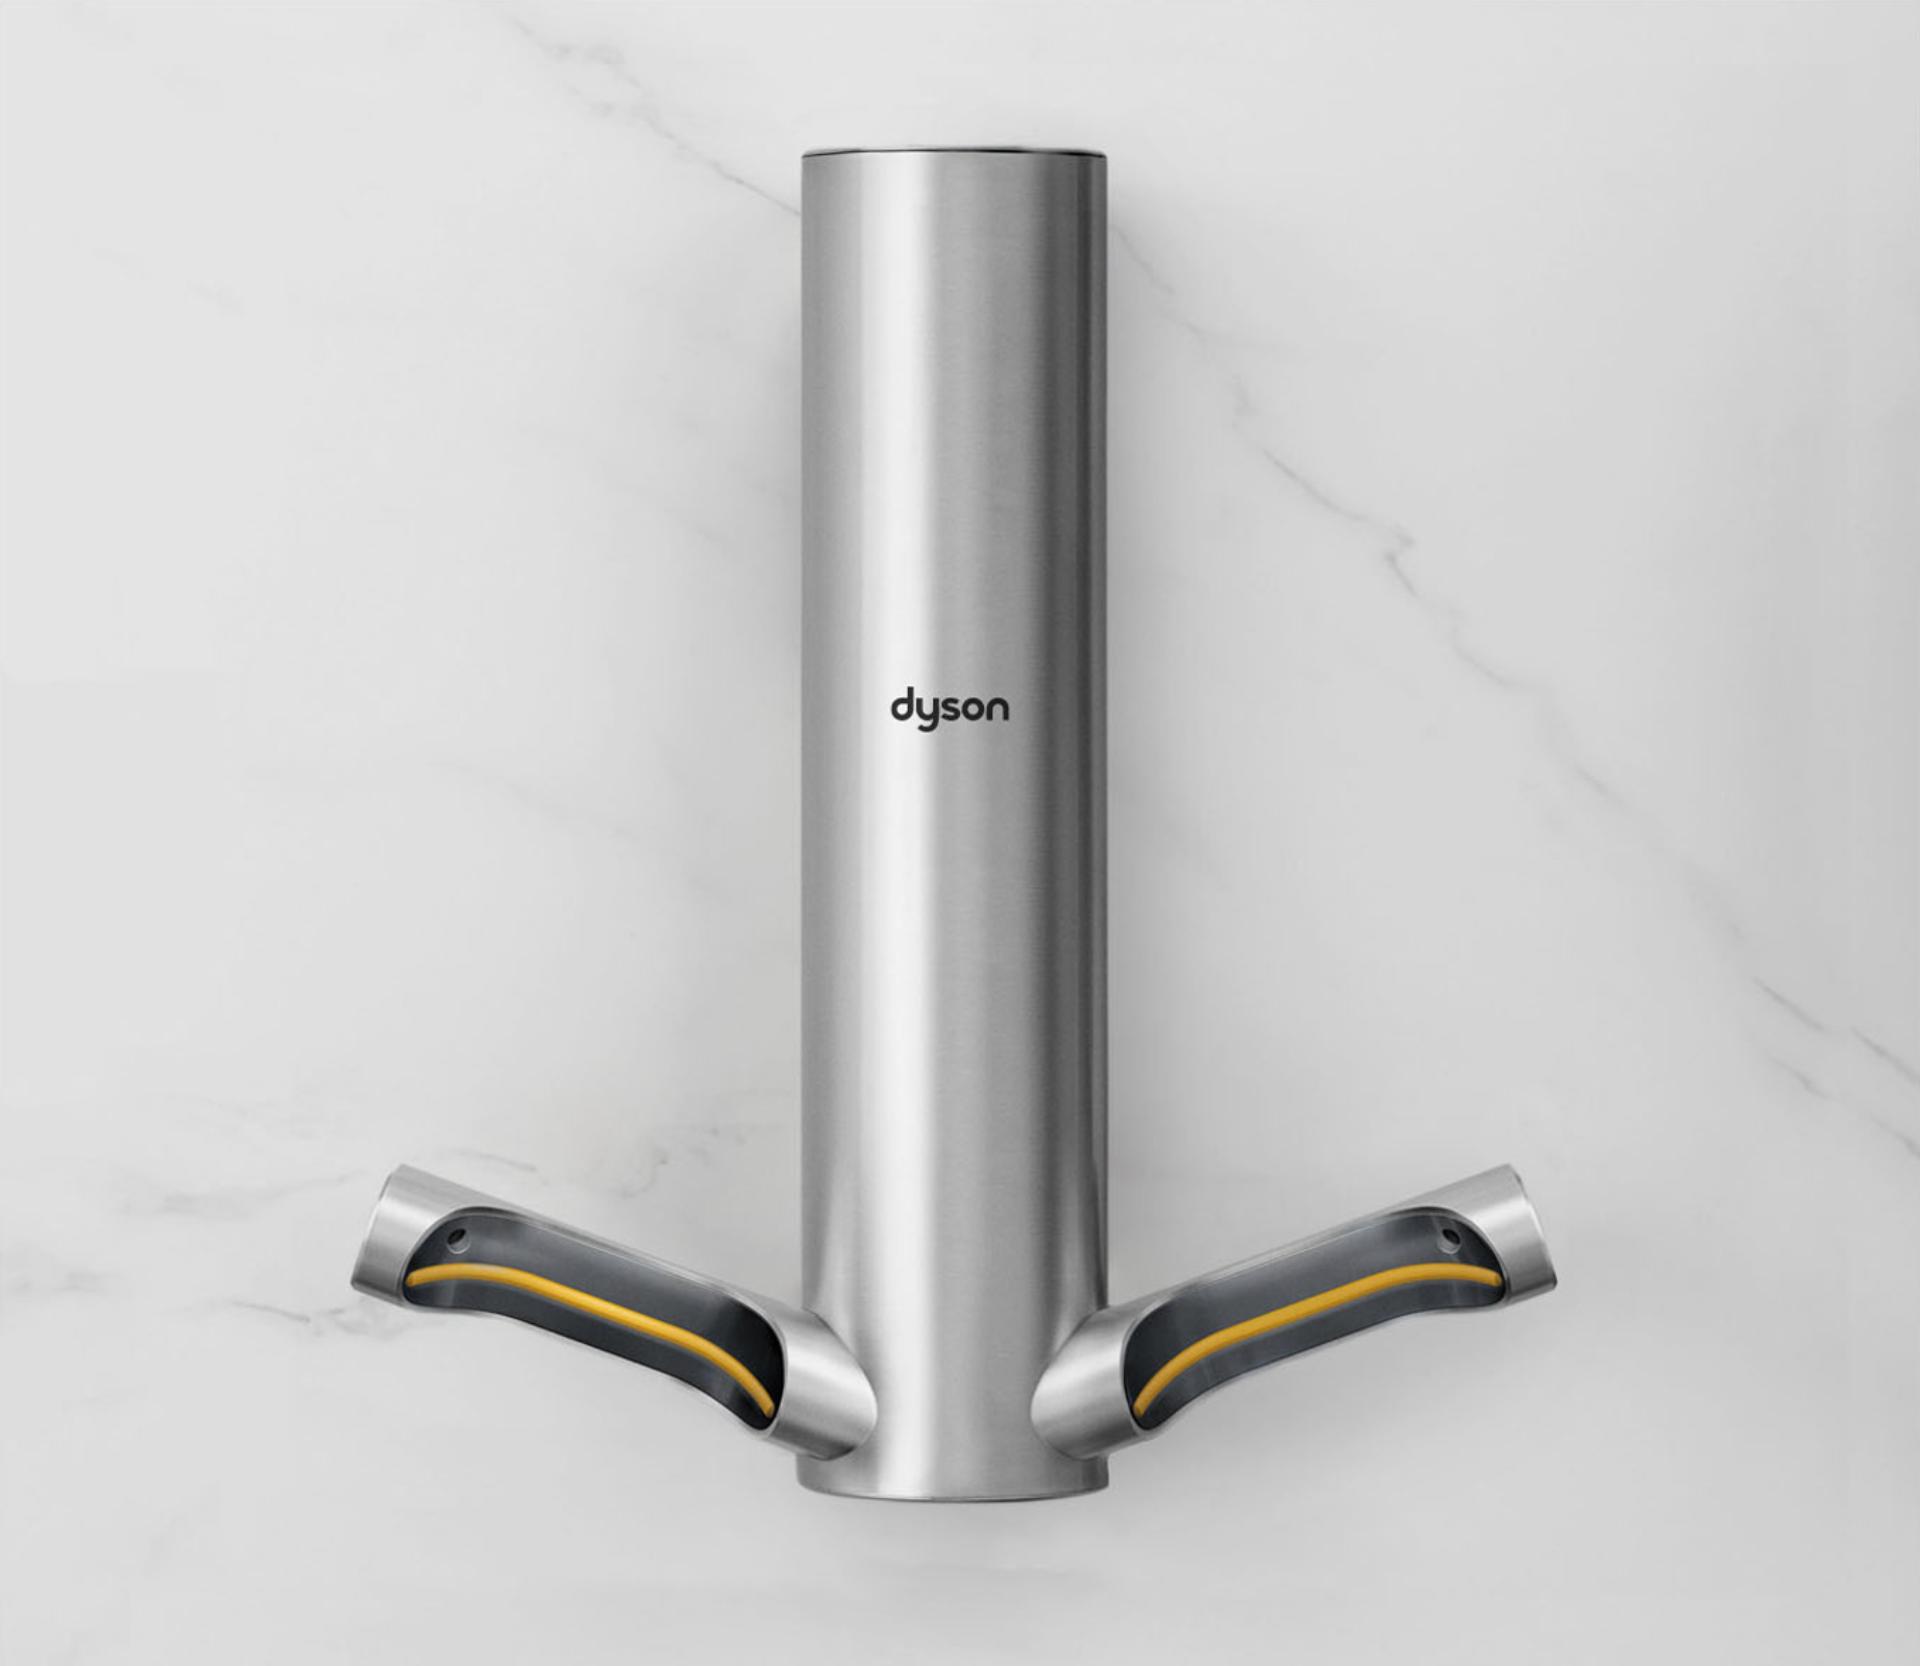 A Dyson Airblade 9kJ mounted on a wall.